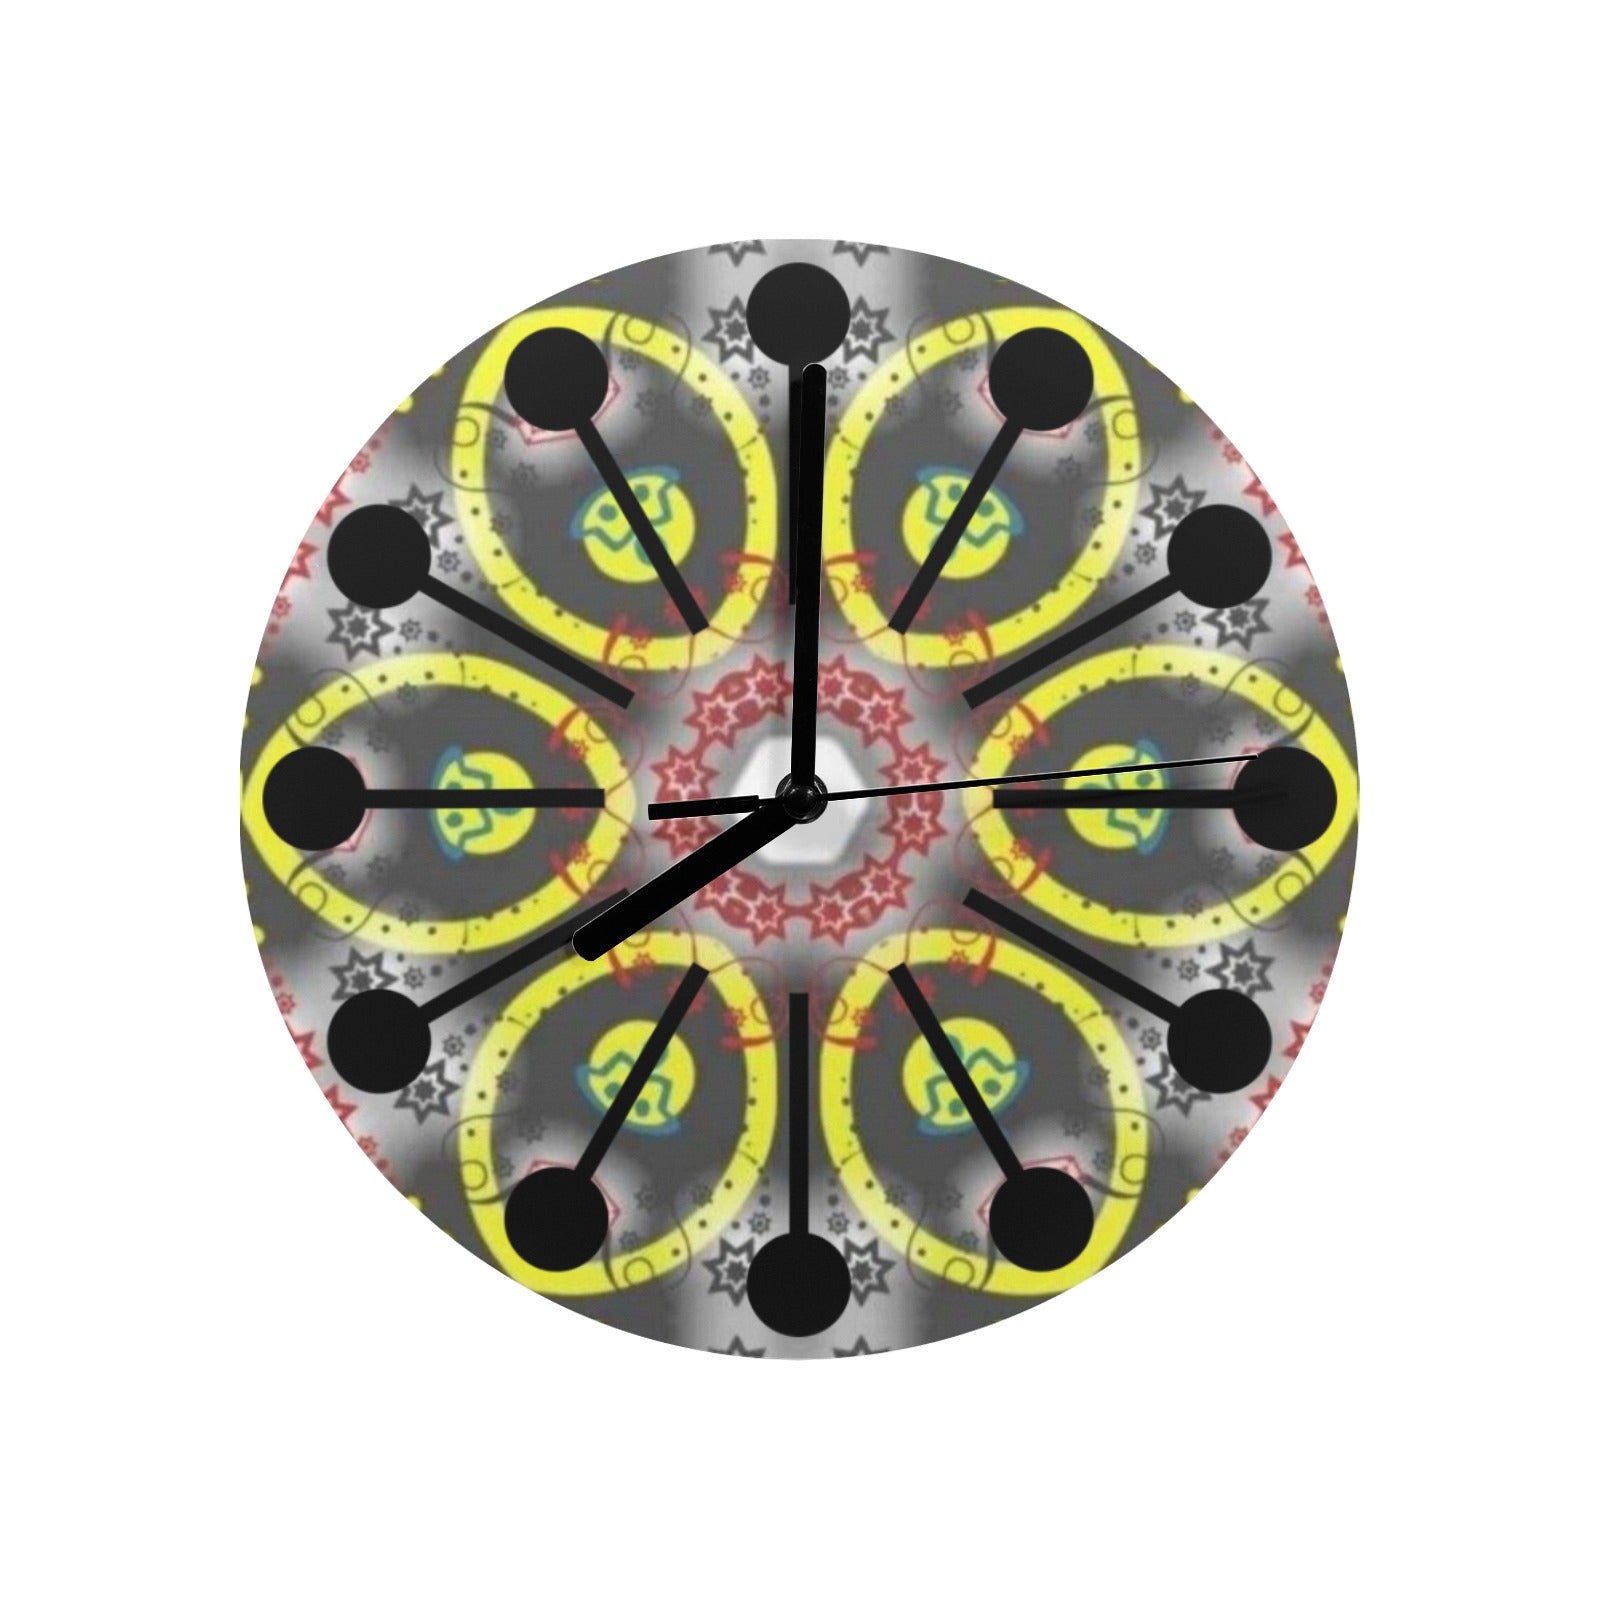 Yellow Designs Clock Personalized Wall Clock (Made in USA)